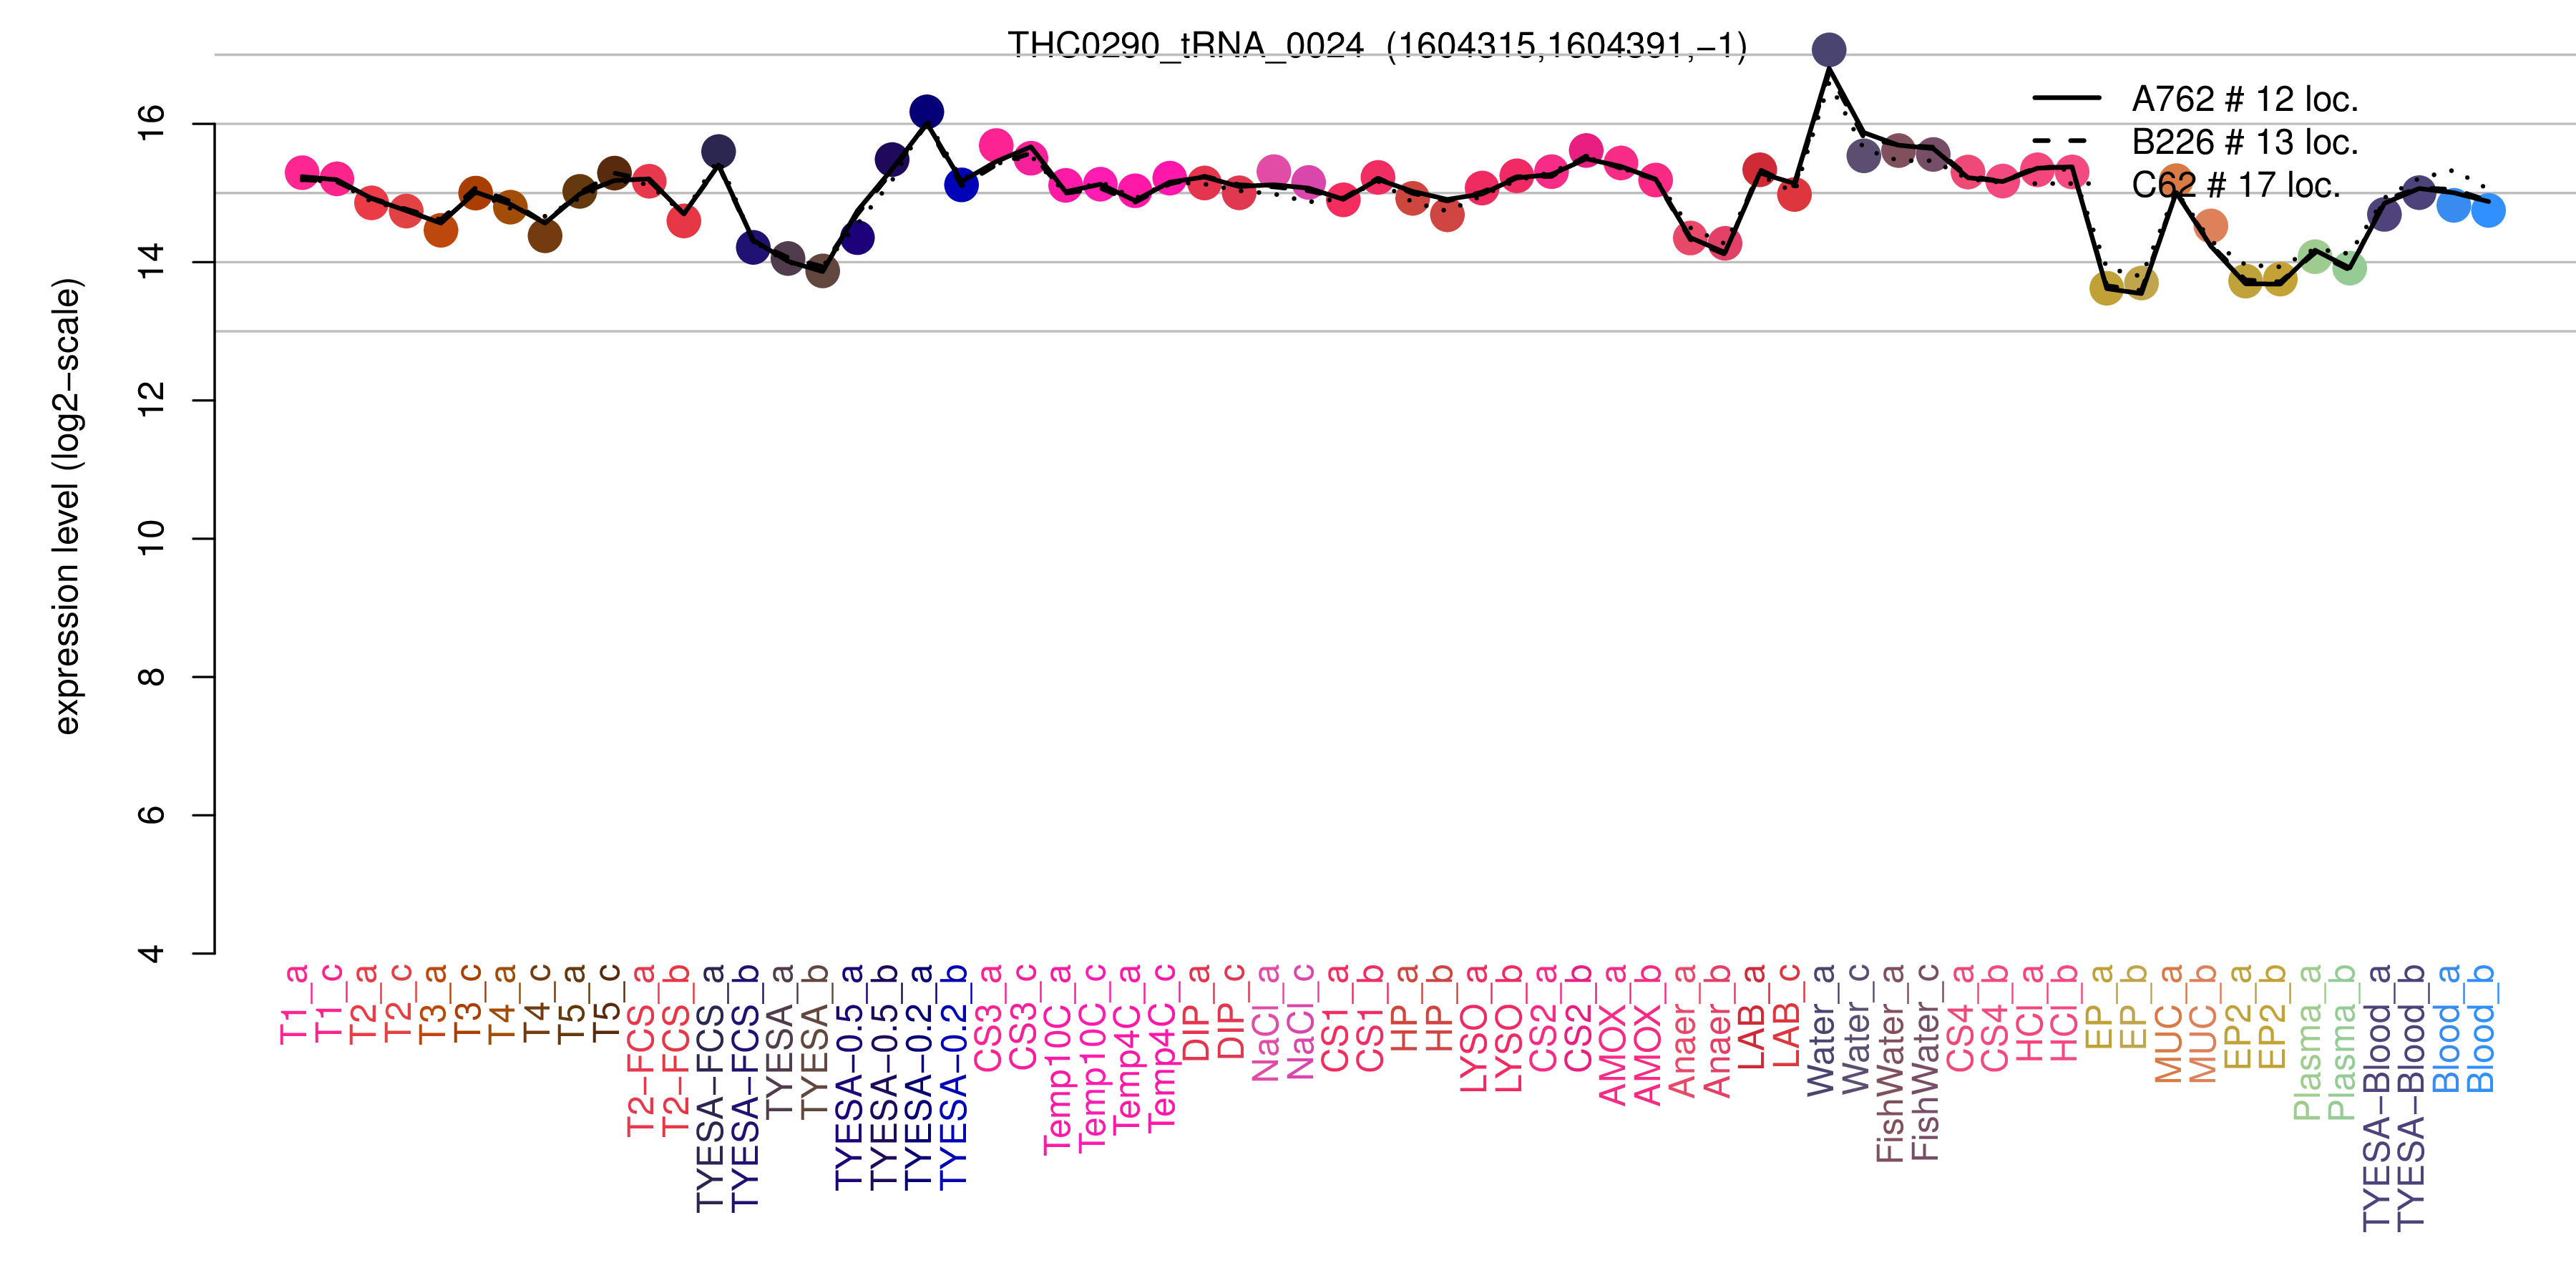 THC0290_tRNA_0024 expression levels among conditions